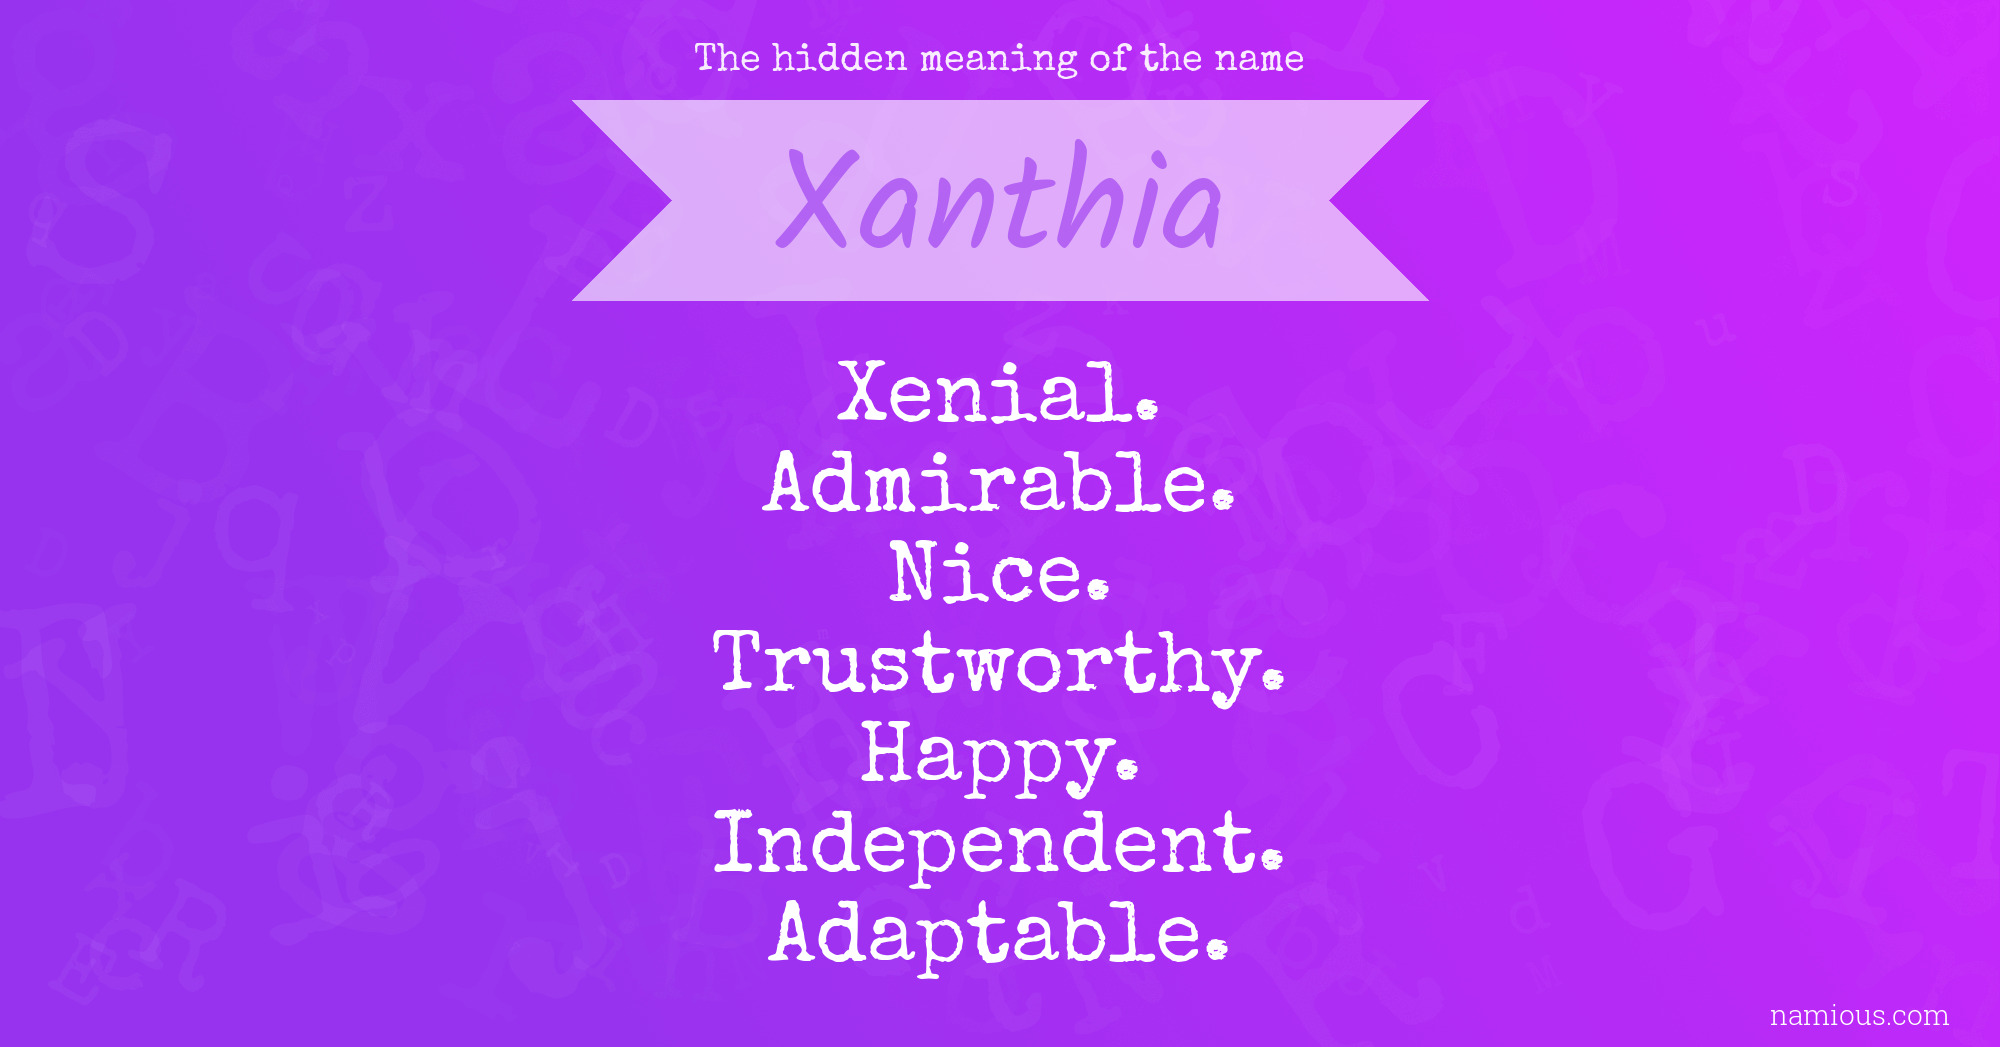 The hidden meaning of the name Xanthia